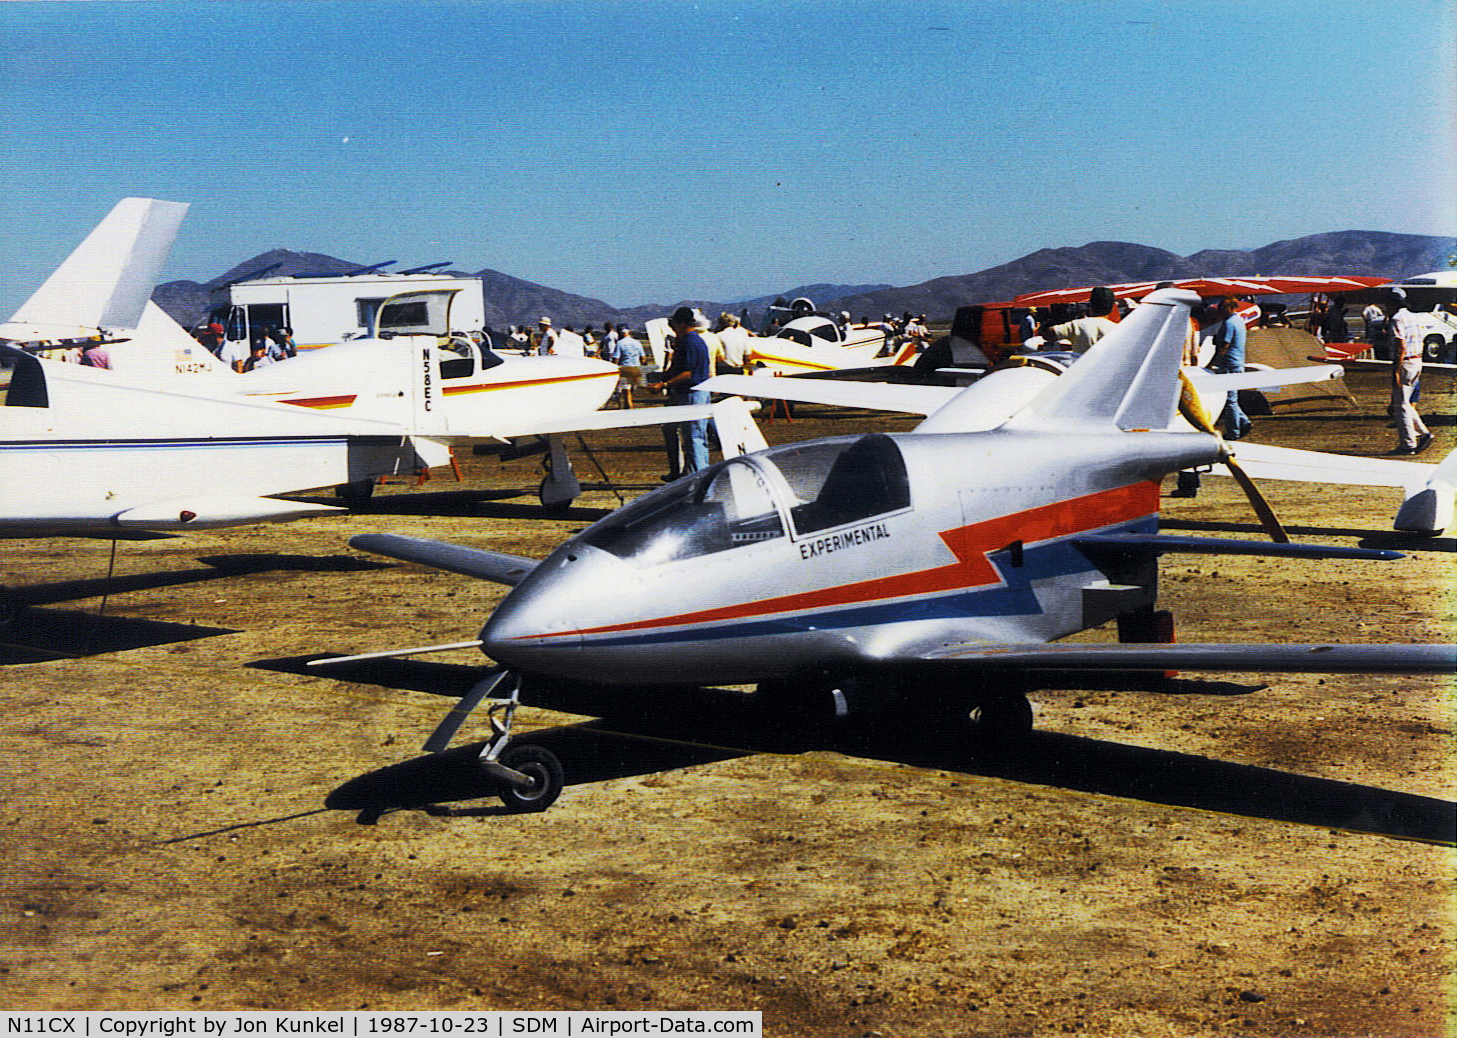 N11CX, 1984 Bede BD-5 C/N 3011, Owned by a doctor who built it at the time the photograph was taken.